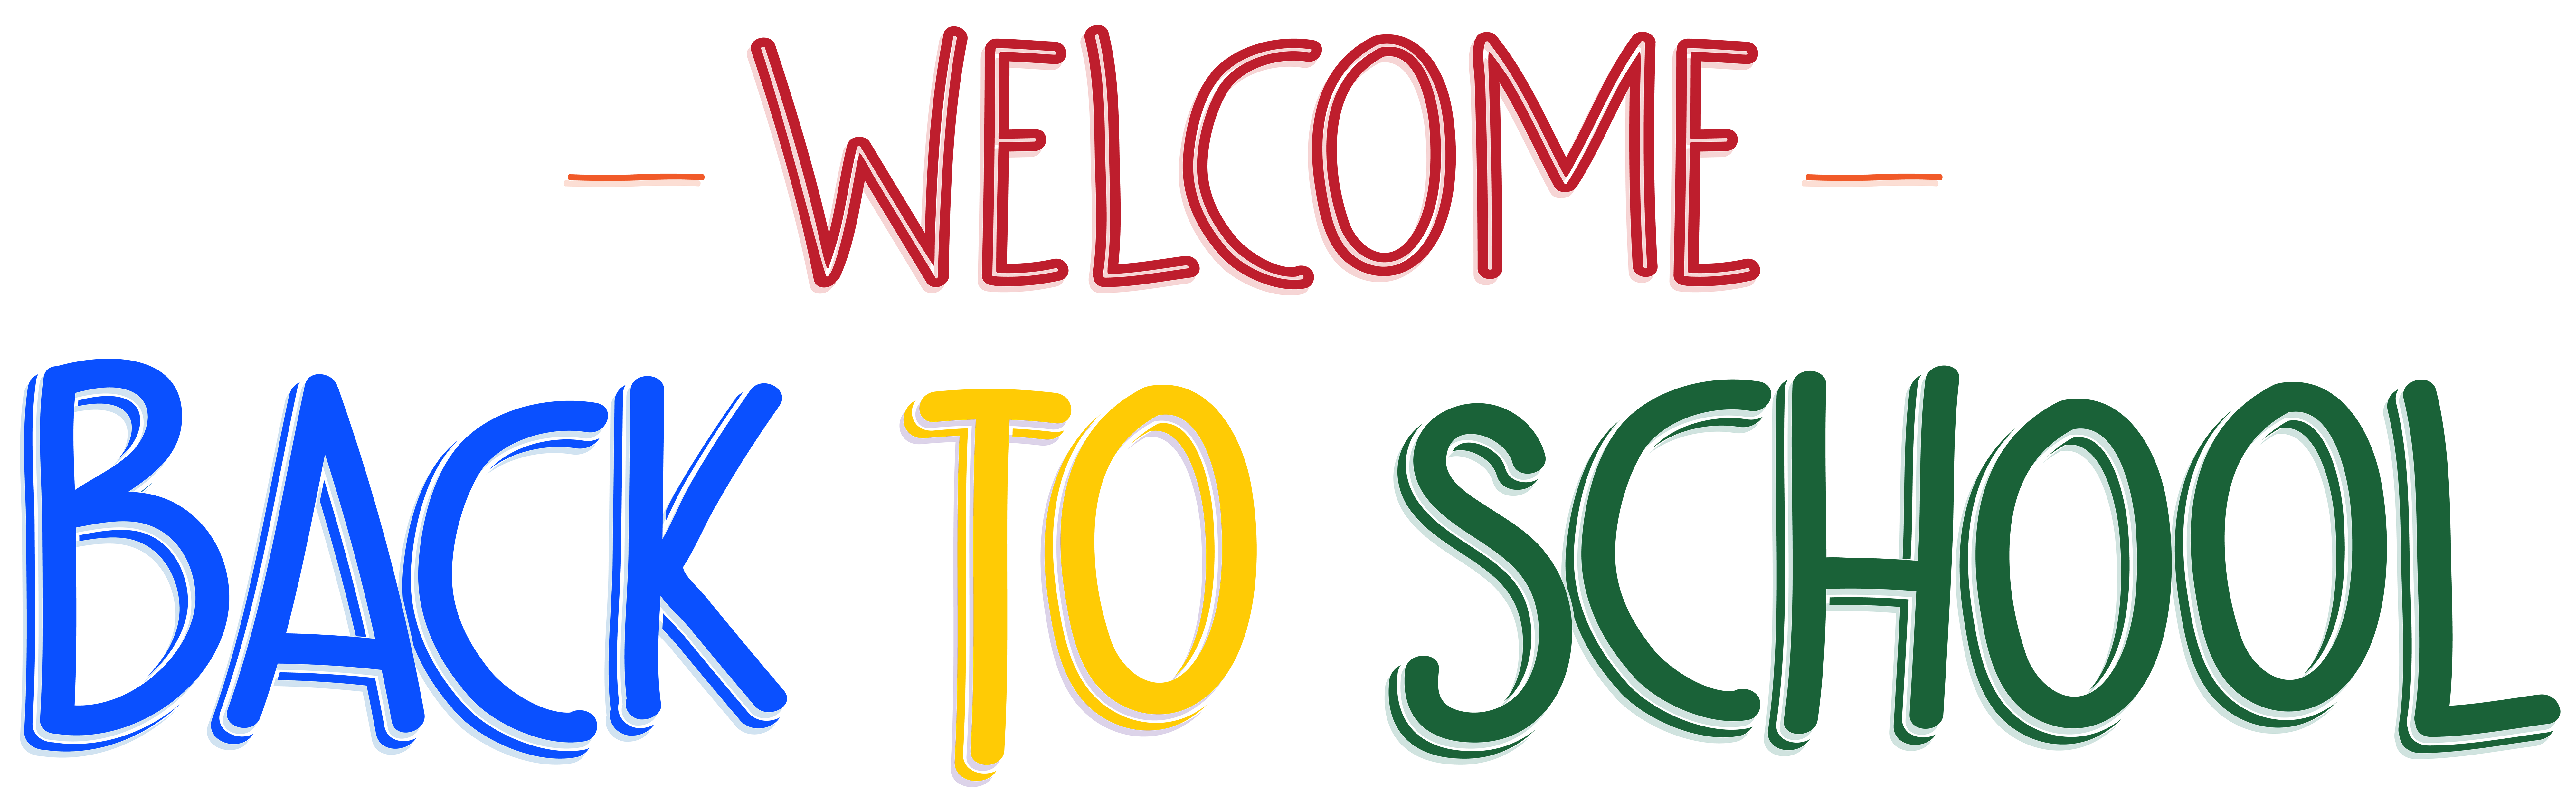 Welcome Back To School Png Clip Art Image Gallery Yopriceville High Quality Images And Transparent Png Free Clipart